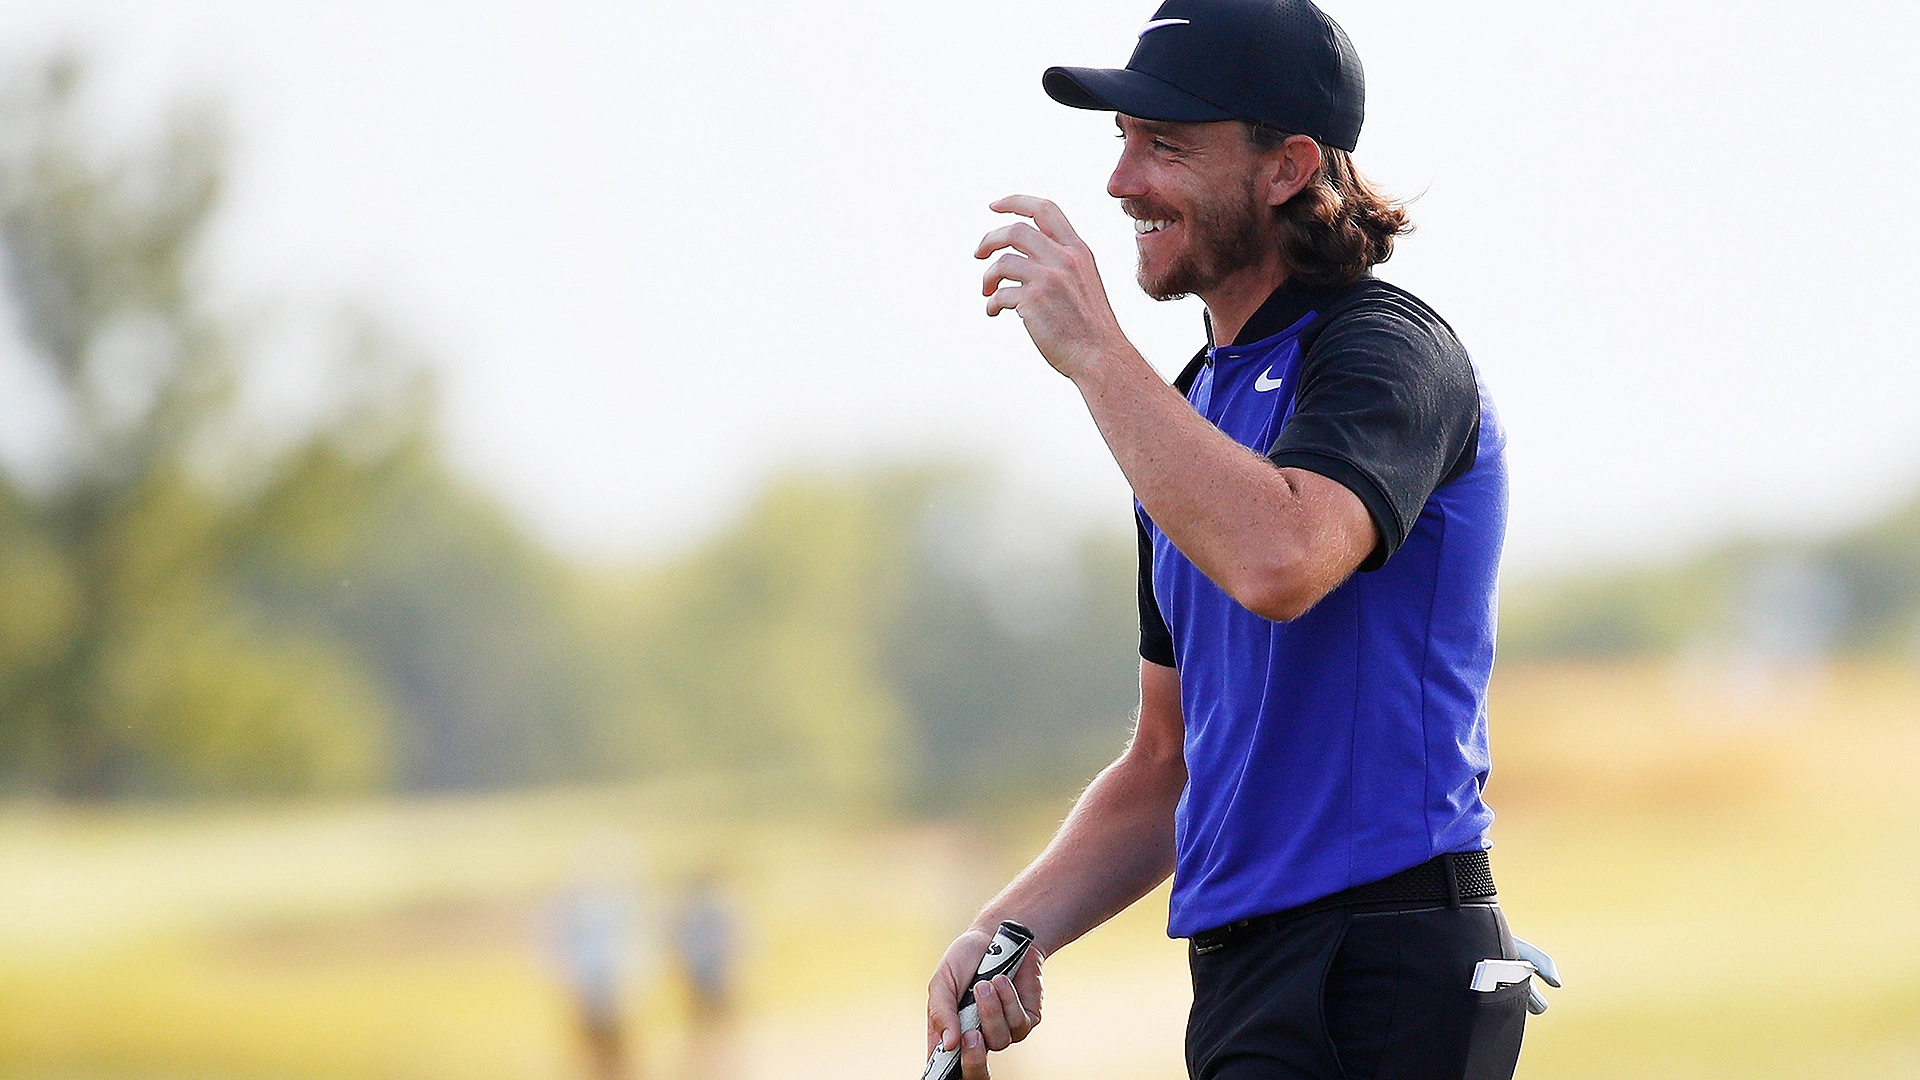 Co-leader Fleetwood can earn Tour card at U.S Open